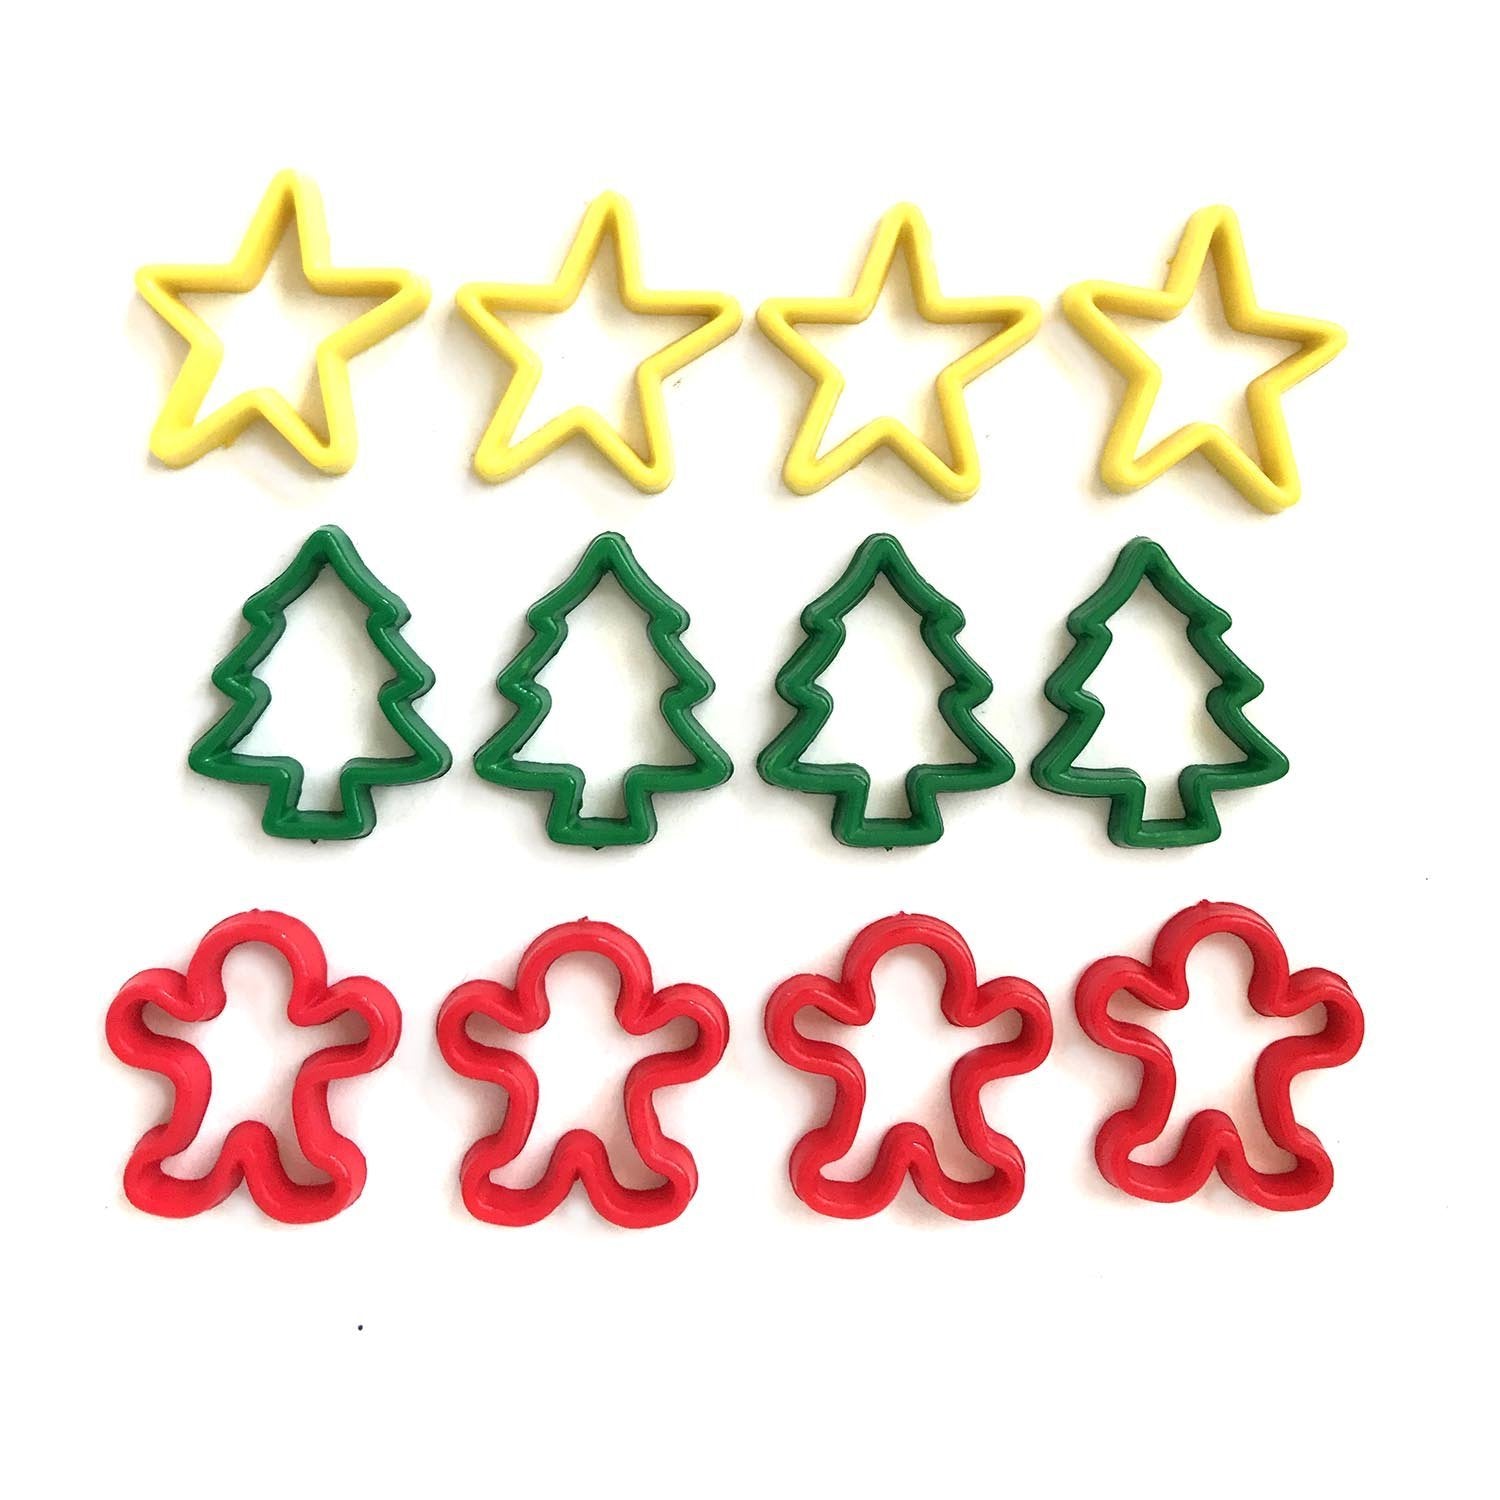 Buy Colorful Cut Outs Buttons and Christmas Craft Embellishments